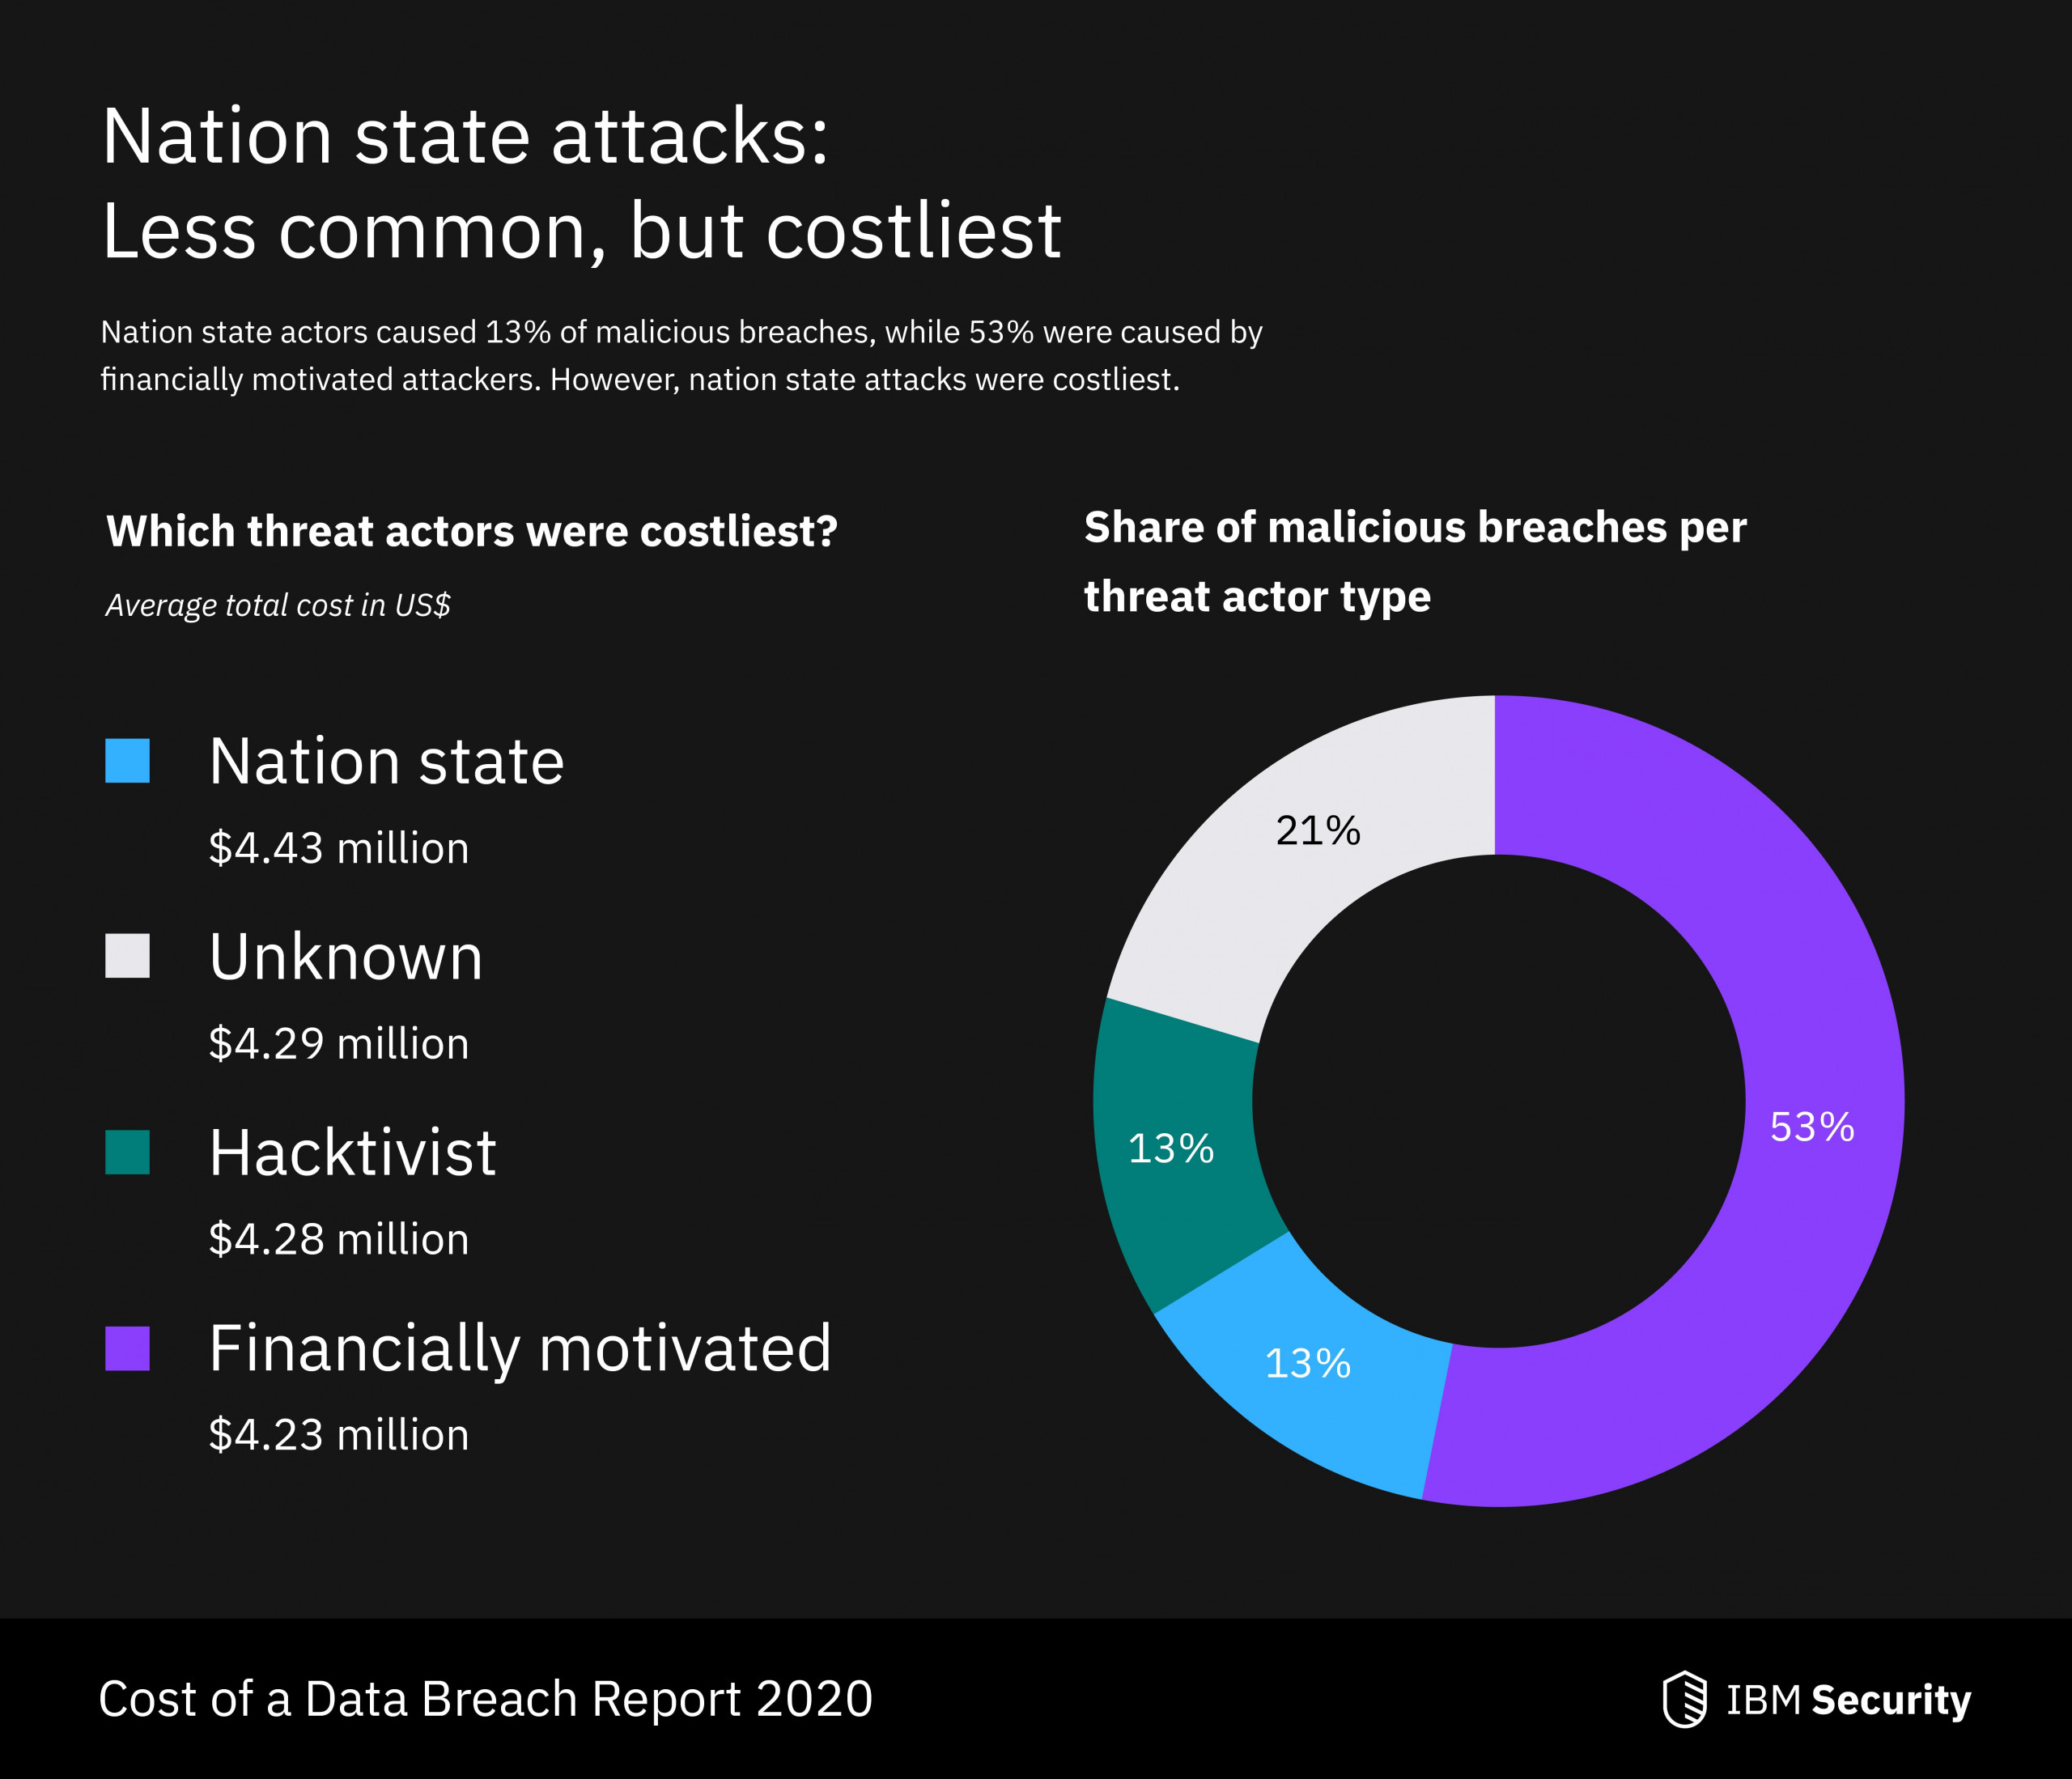 What’s New in the 2020 Cost of a Data Breach Report